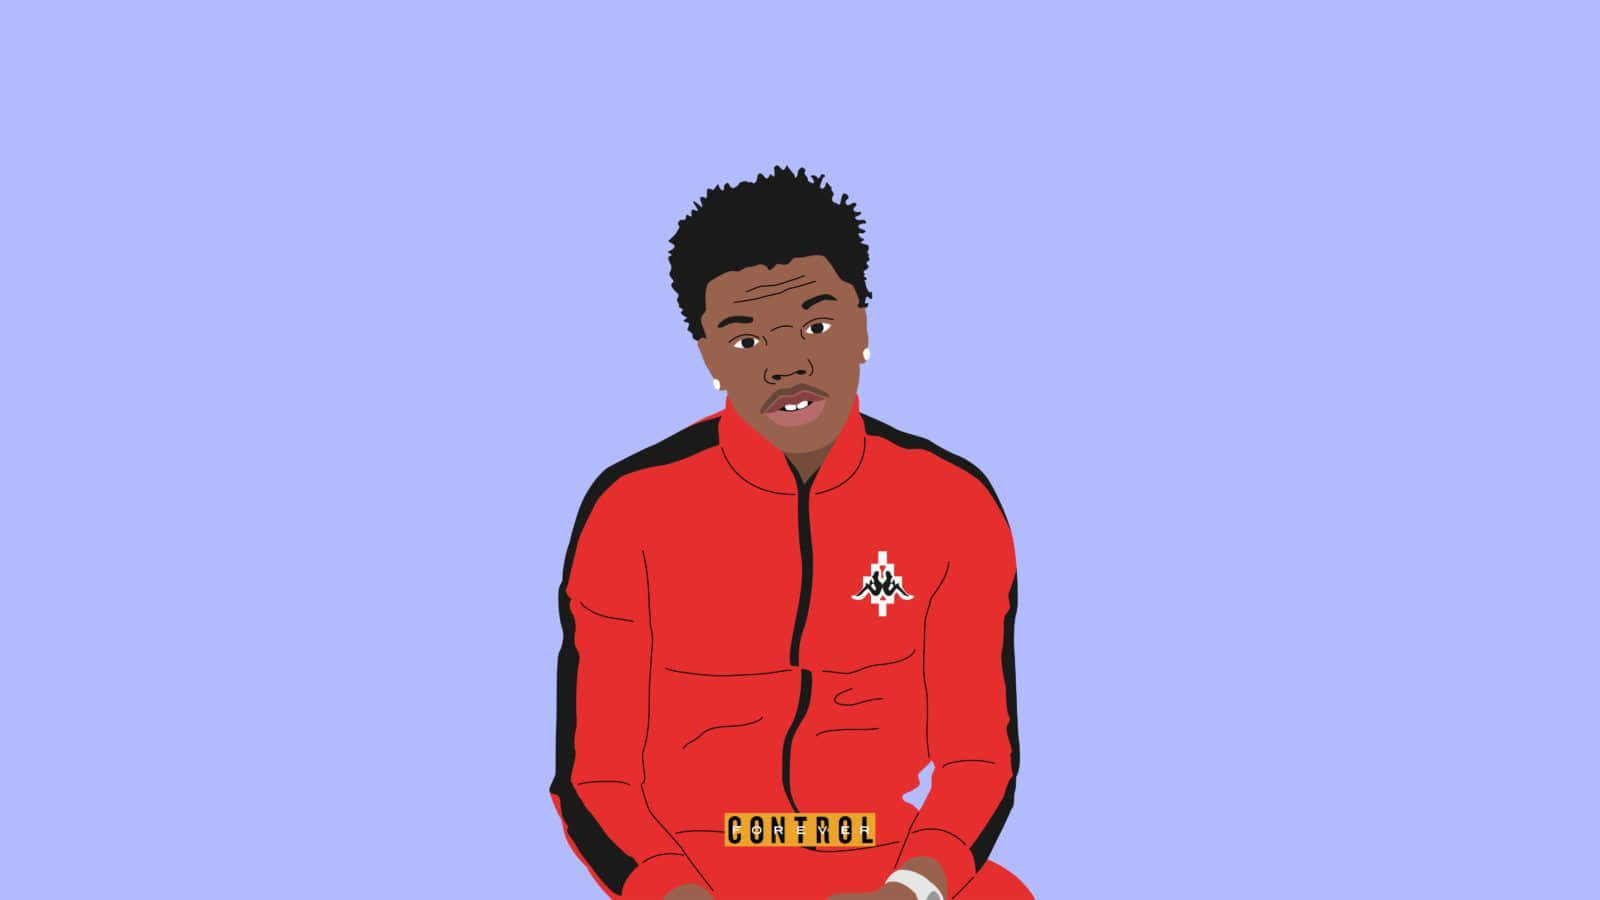 Catch up with Lil Baby at Wallpapers.com Wallpaper